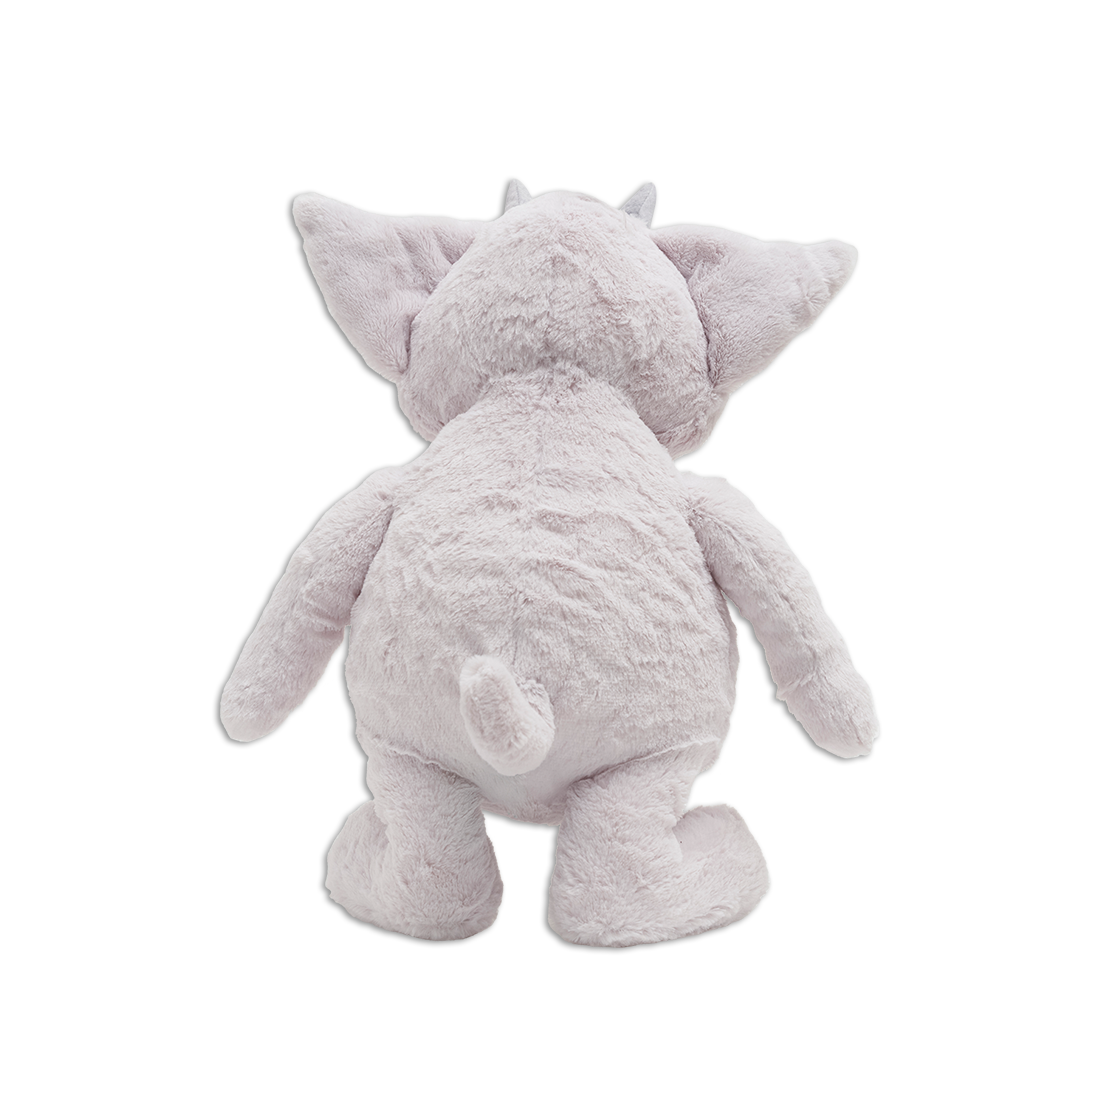 Exclusive NED Plush